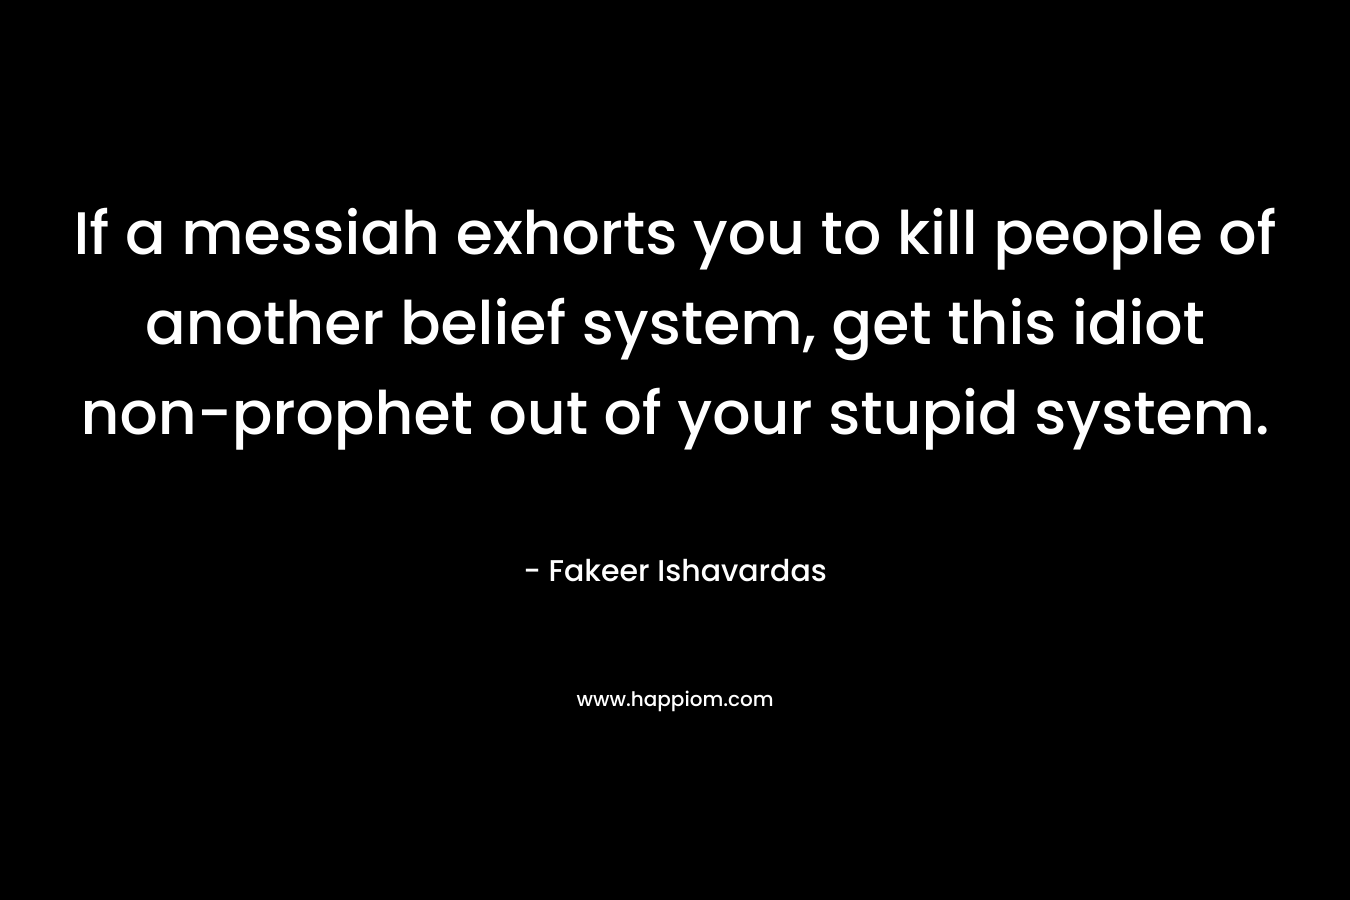 If a messiah exhorts you to kill people of another belief system, get this idiot non-prophet out of your stupid system. – Fakeer Ishavardas